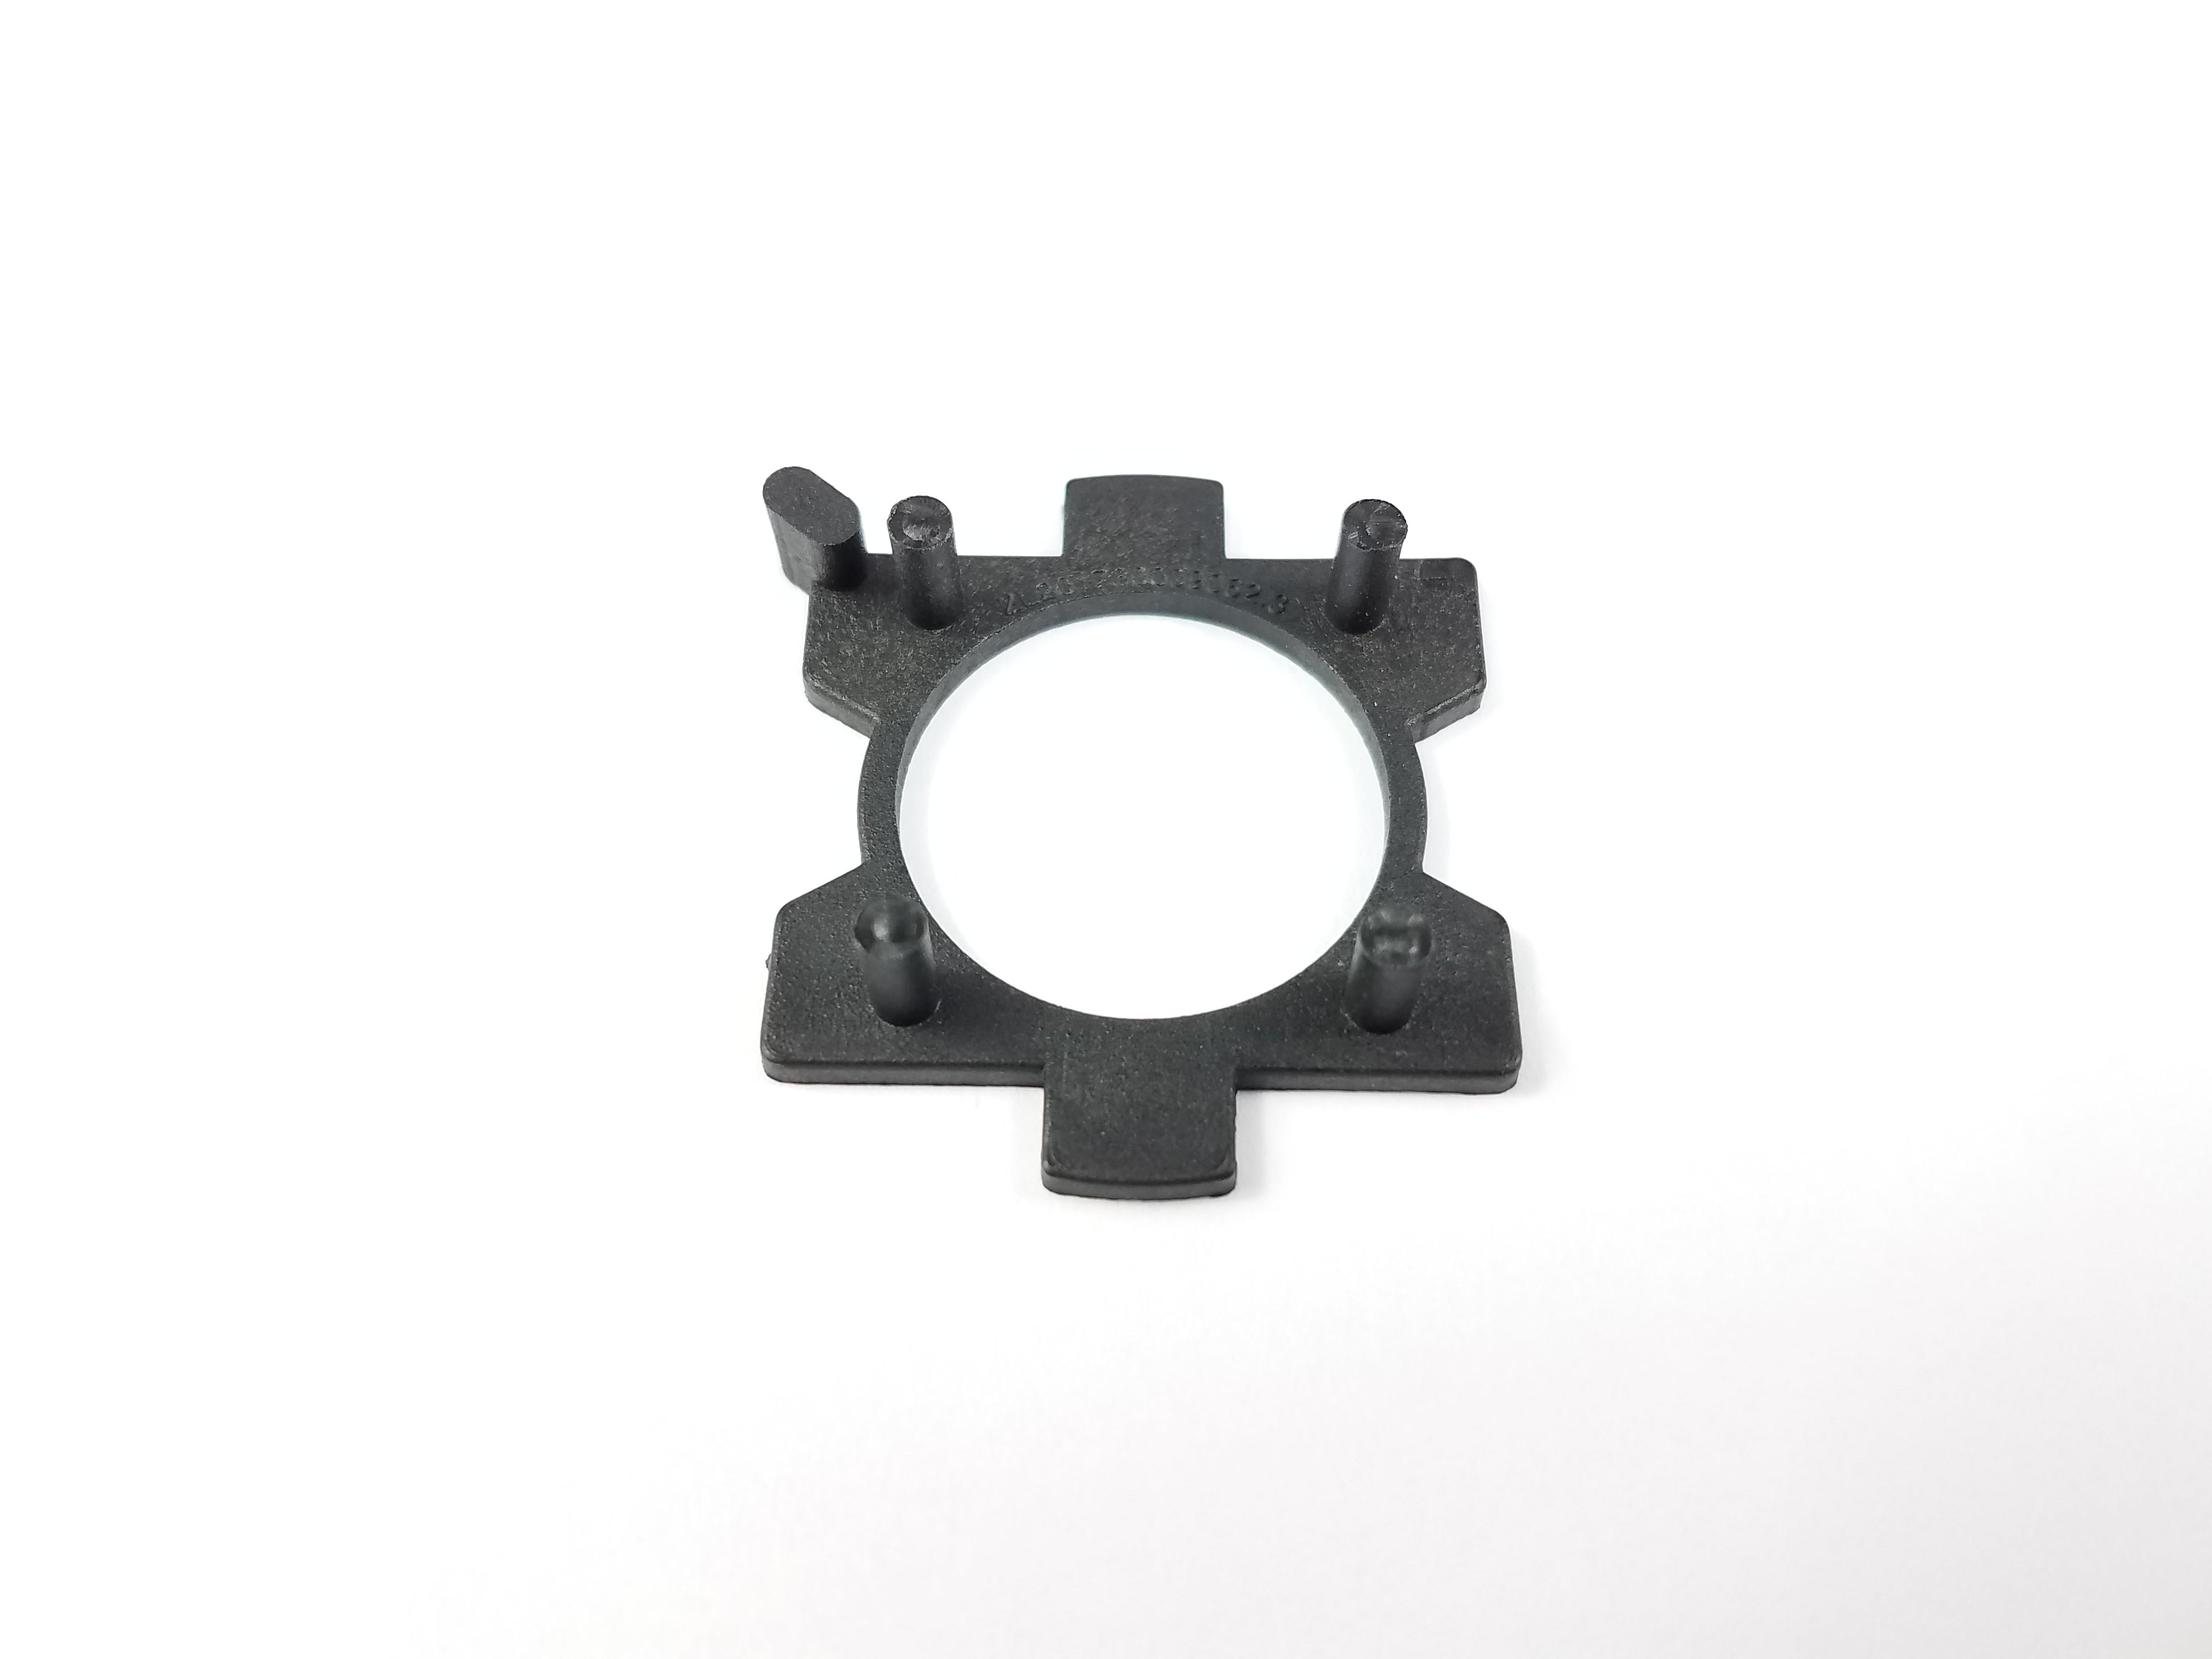 GSXR H7 Low Beam Adapter